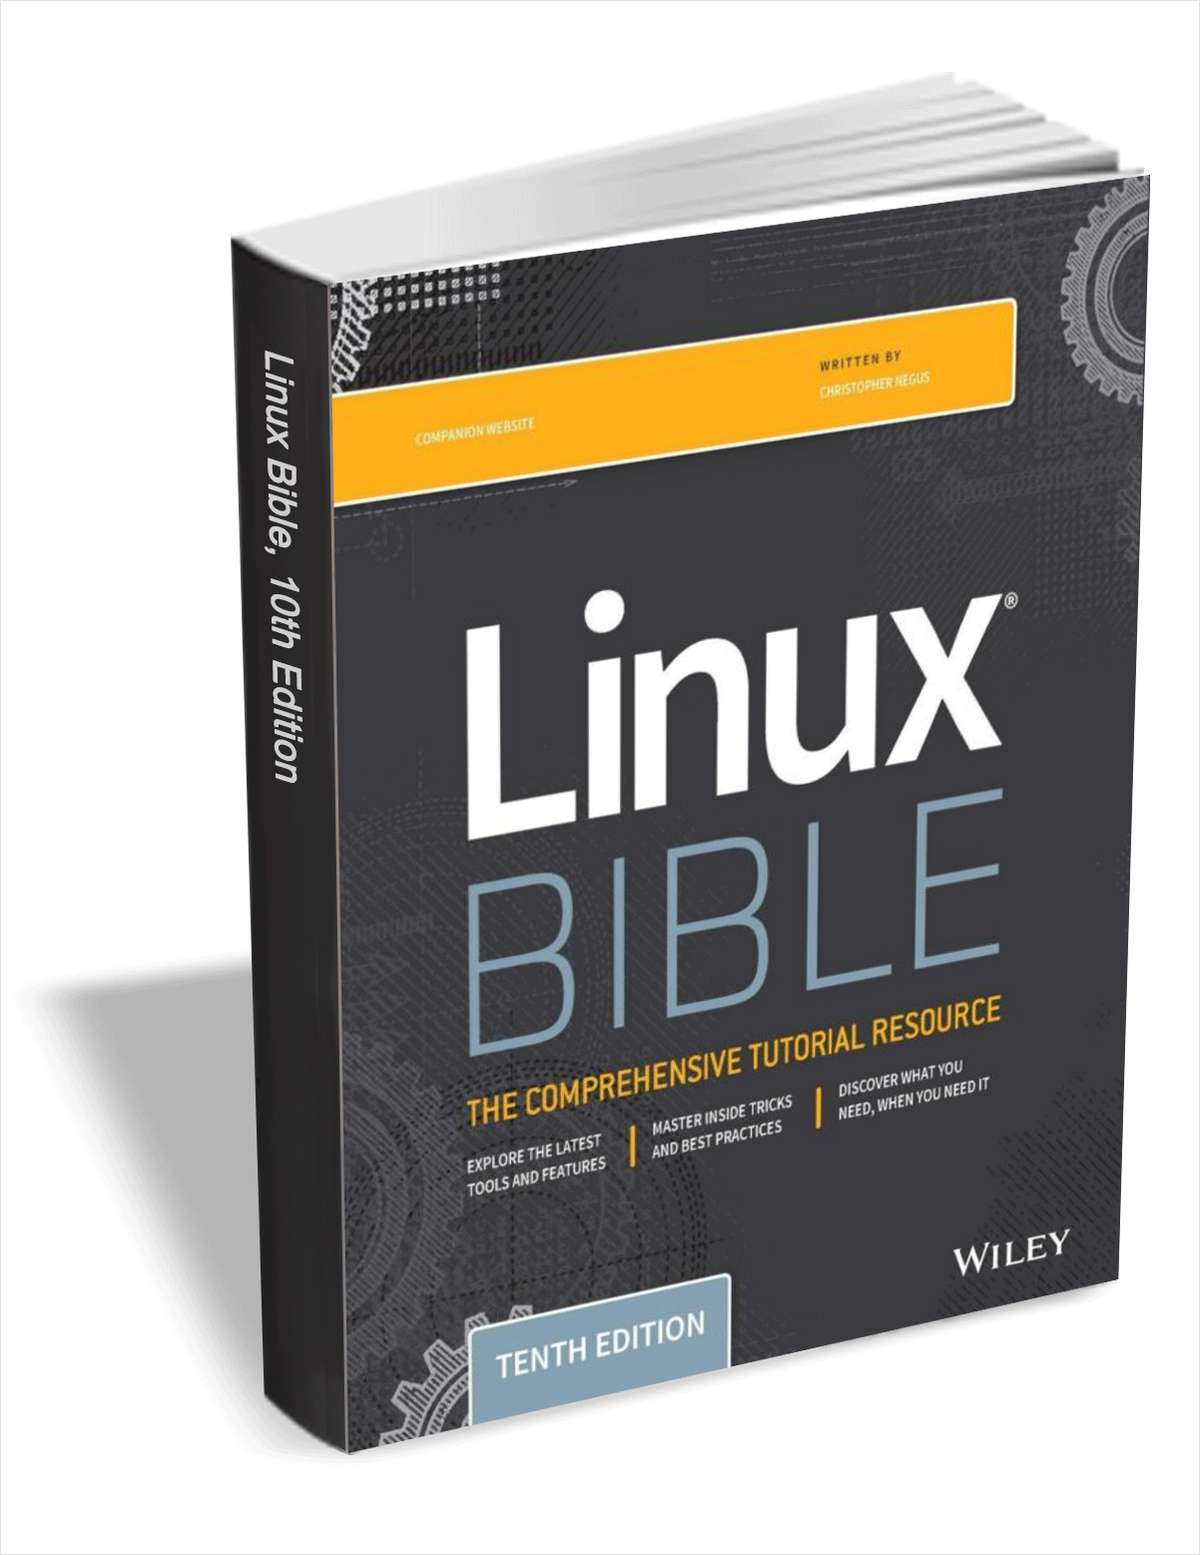 Linux Bible, 10th Edition ($36.00 Value) FREE for a Limited Time